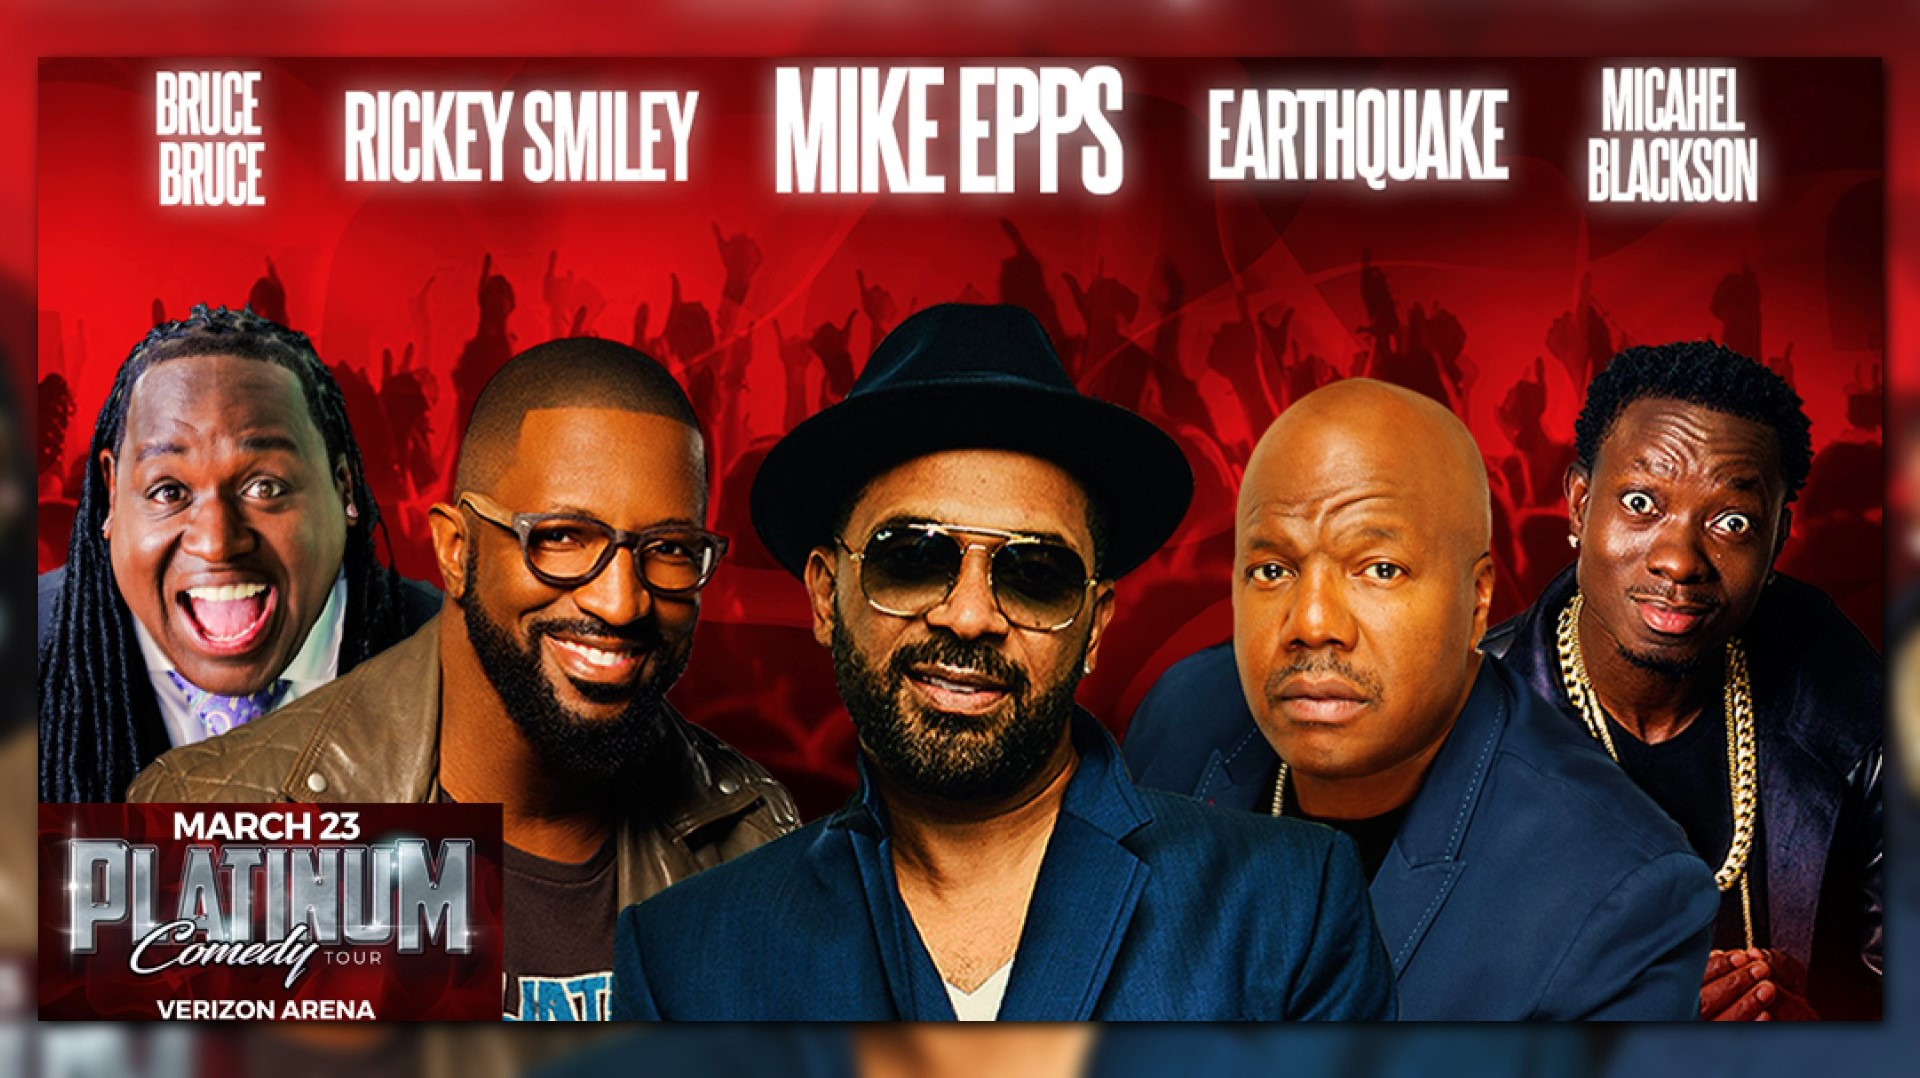 Mike Epps, Rickey Smiley part of comedy tour coming to Verizon